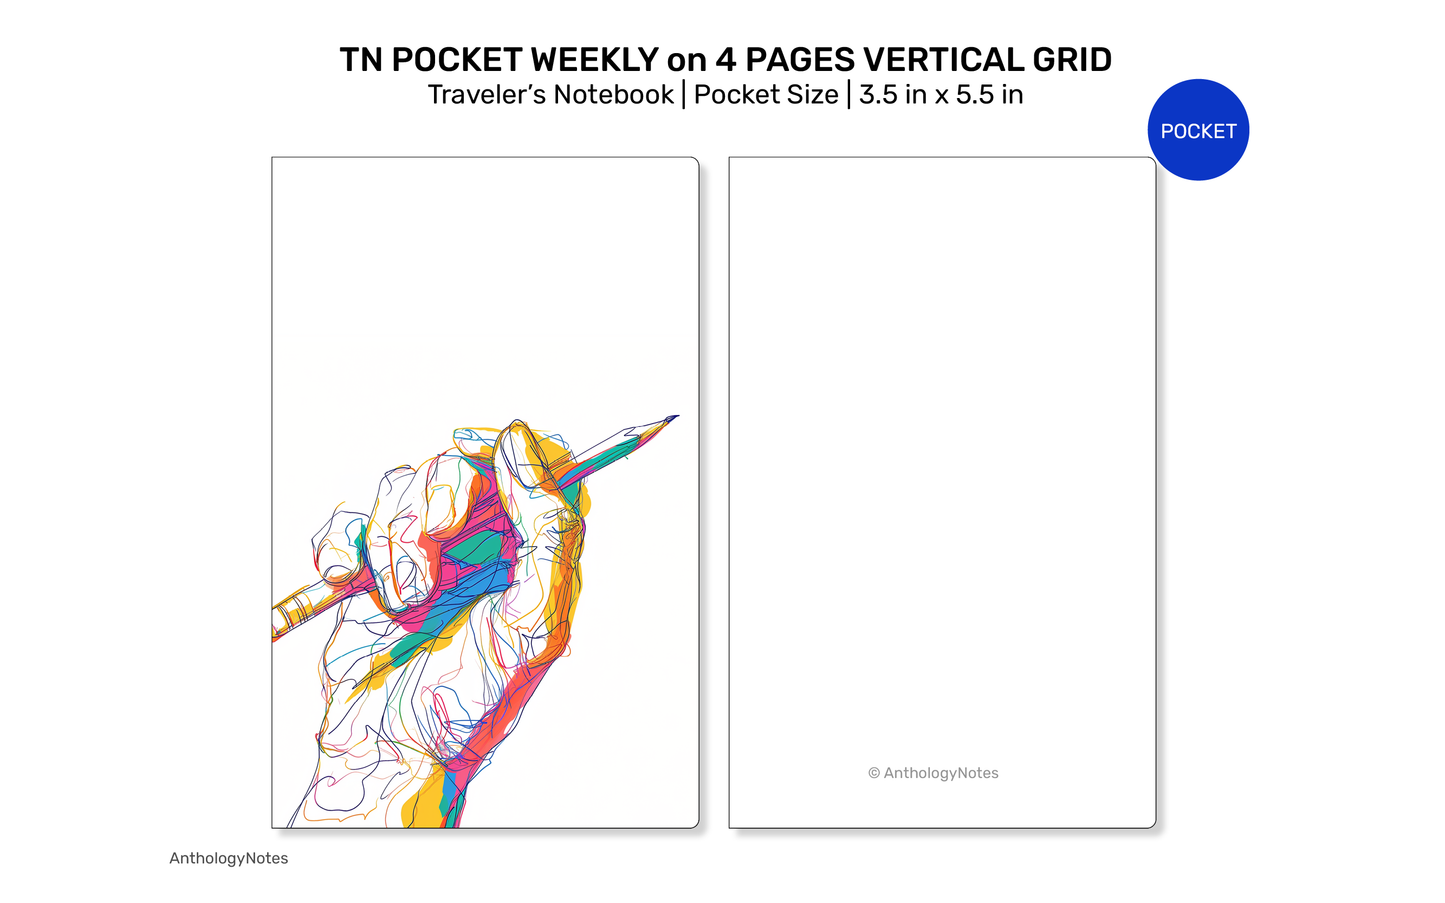 TN Pocket Size Weekly Vertical on 4 Pages GRID | Printable Traveler's Notebook Insert TN Minimalist FN22-05